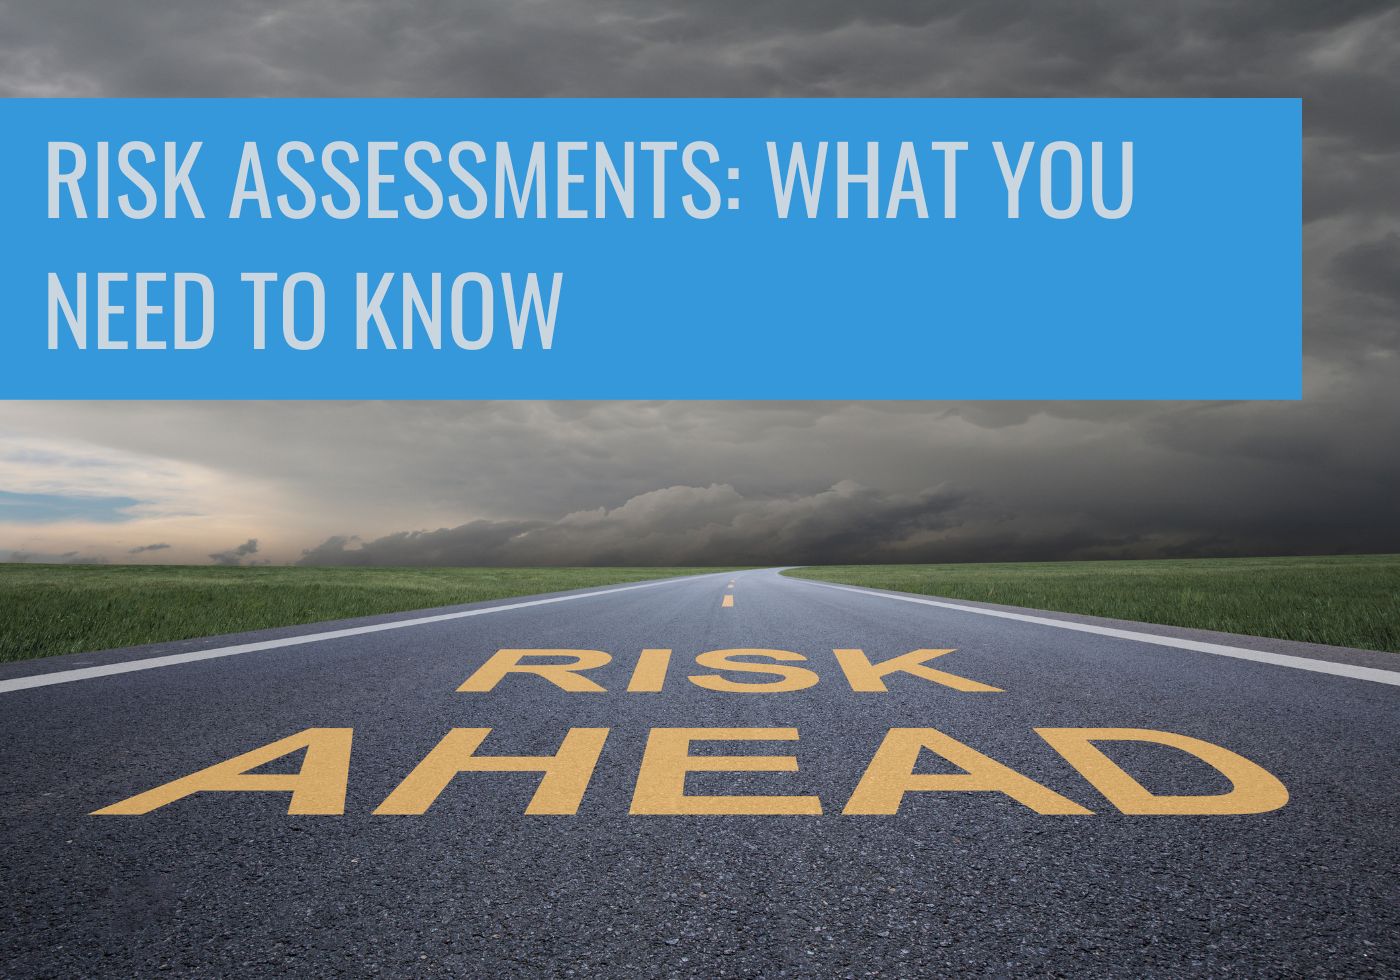 What is included in a risk assessment